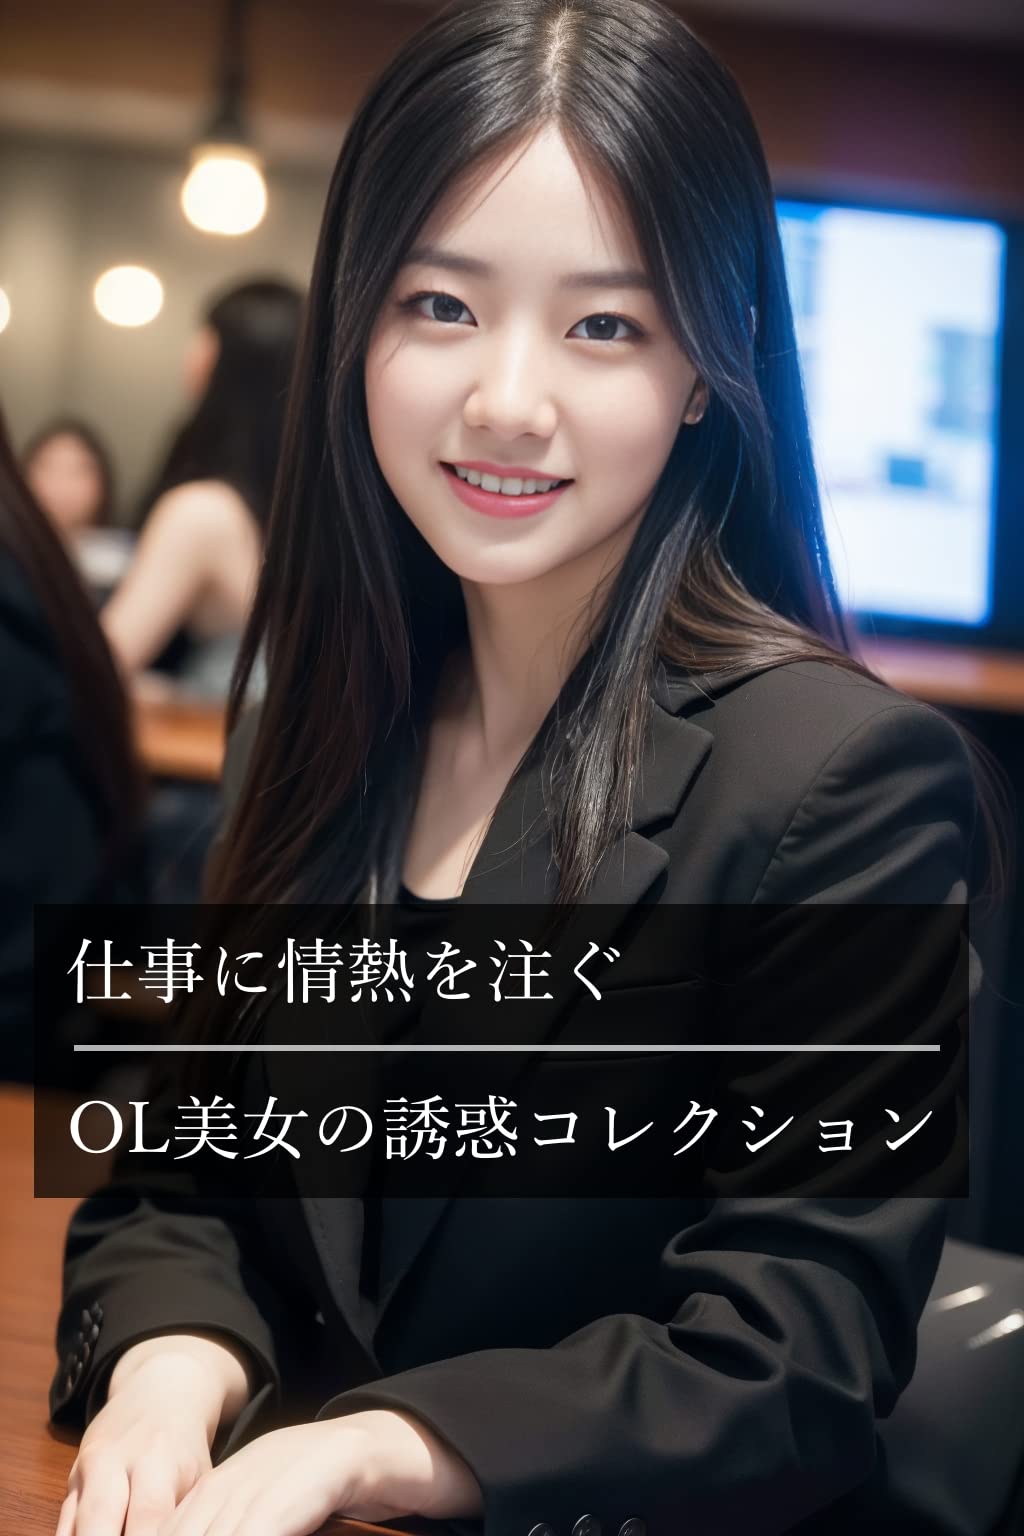 Beauty is justice Passion for Work Seduction Collection of Beautiful Office Lady Next Generation Gravure Photo Collection by AI Next Generation Gravure ... Photo Collection by AI (Japanese Edition)